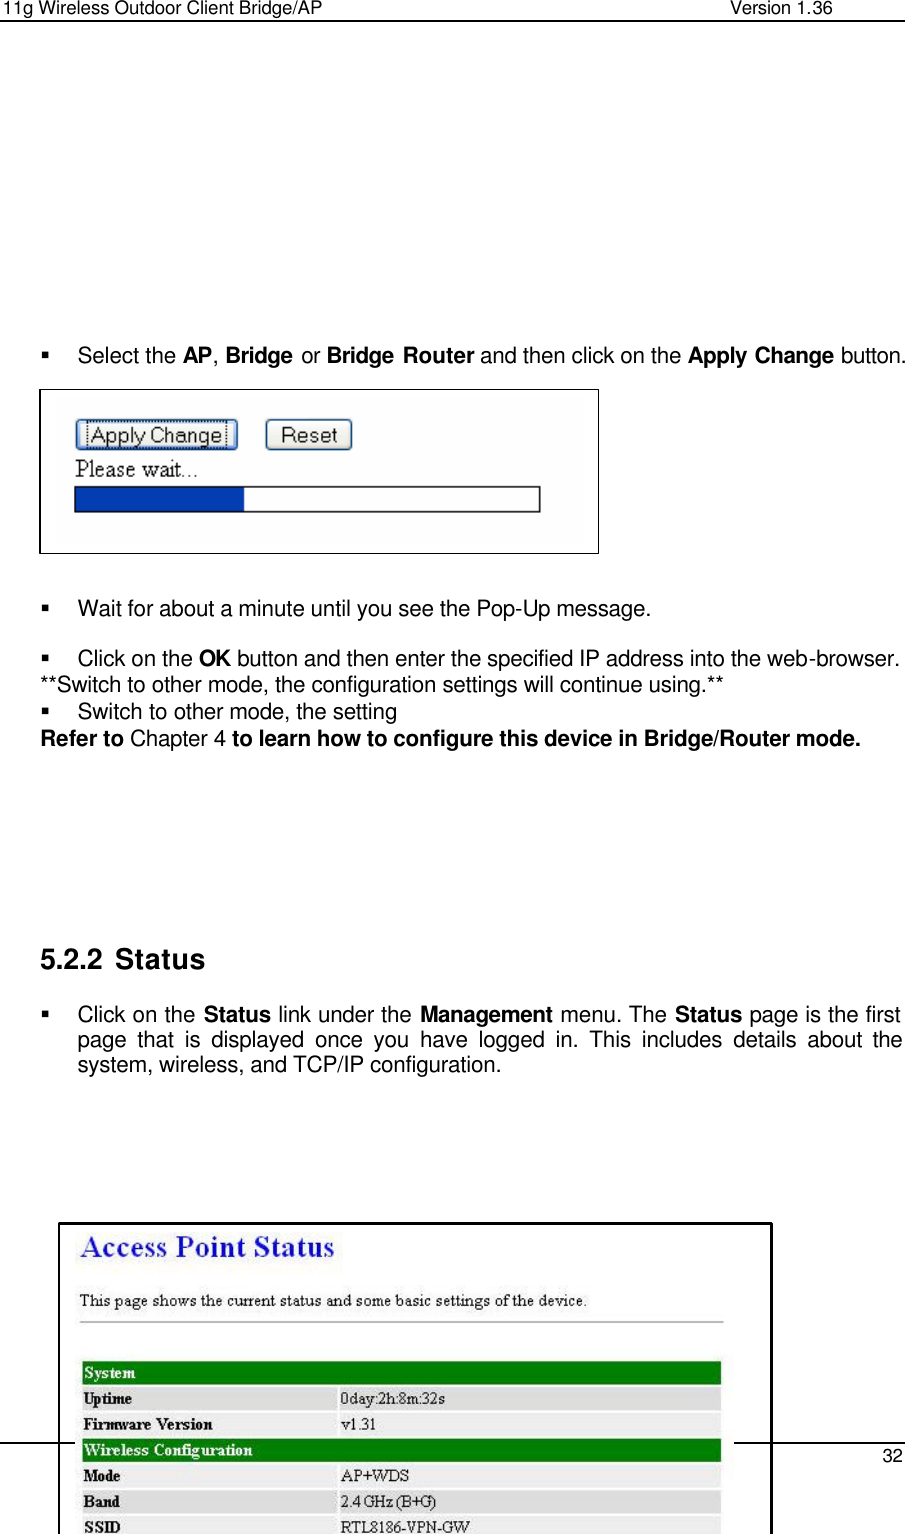 11g Wireless Outdoor Client Bridge/AP                Version 1.36    32            § Select the AP, Bridge or Bridge Router and then click on the Apply Change button.           § Wait for about a minute until you see the Pop-Up message.   § Click on the OK button and then enter the specified IP address into the web-browser.  **Switch to other mode, the configuration settings will continue using.** § Switch to other mode, the setting  Refer to Chapter 4 to learn how to configure this device in Bridge/Router mode.          5.2.2 Status § Click on the Status link under the Management menu. The Status page is the first page that is displayed once you have logged in. This includes details about the system, wireless, and TCP/IP configuration.                